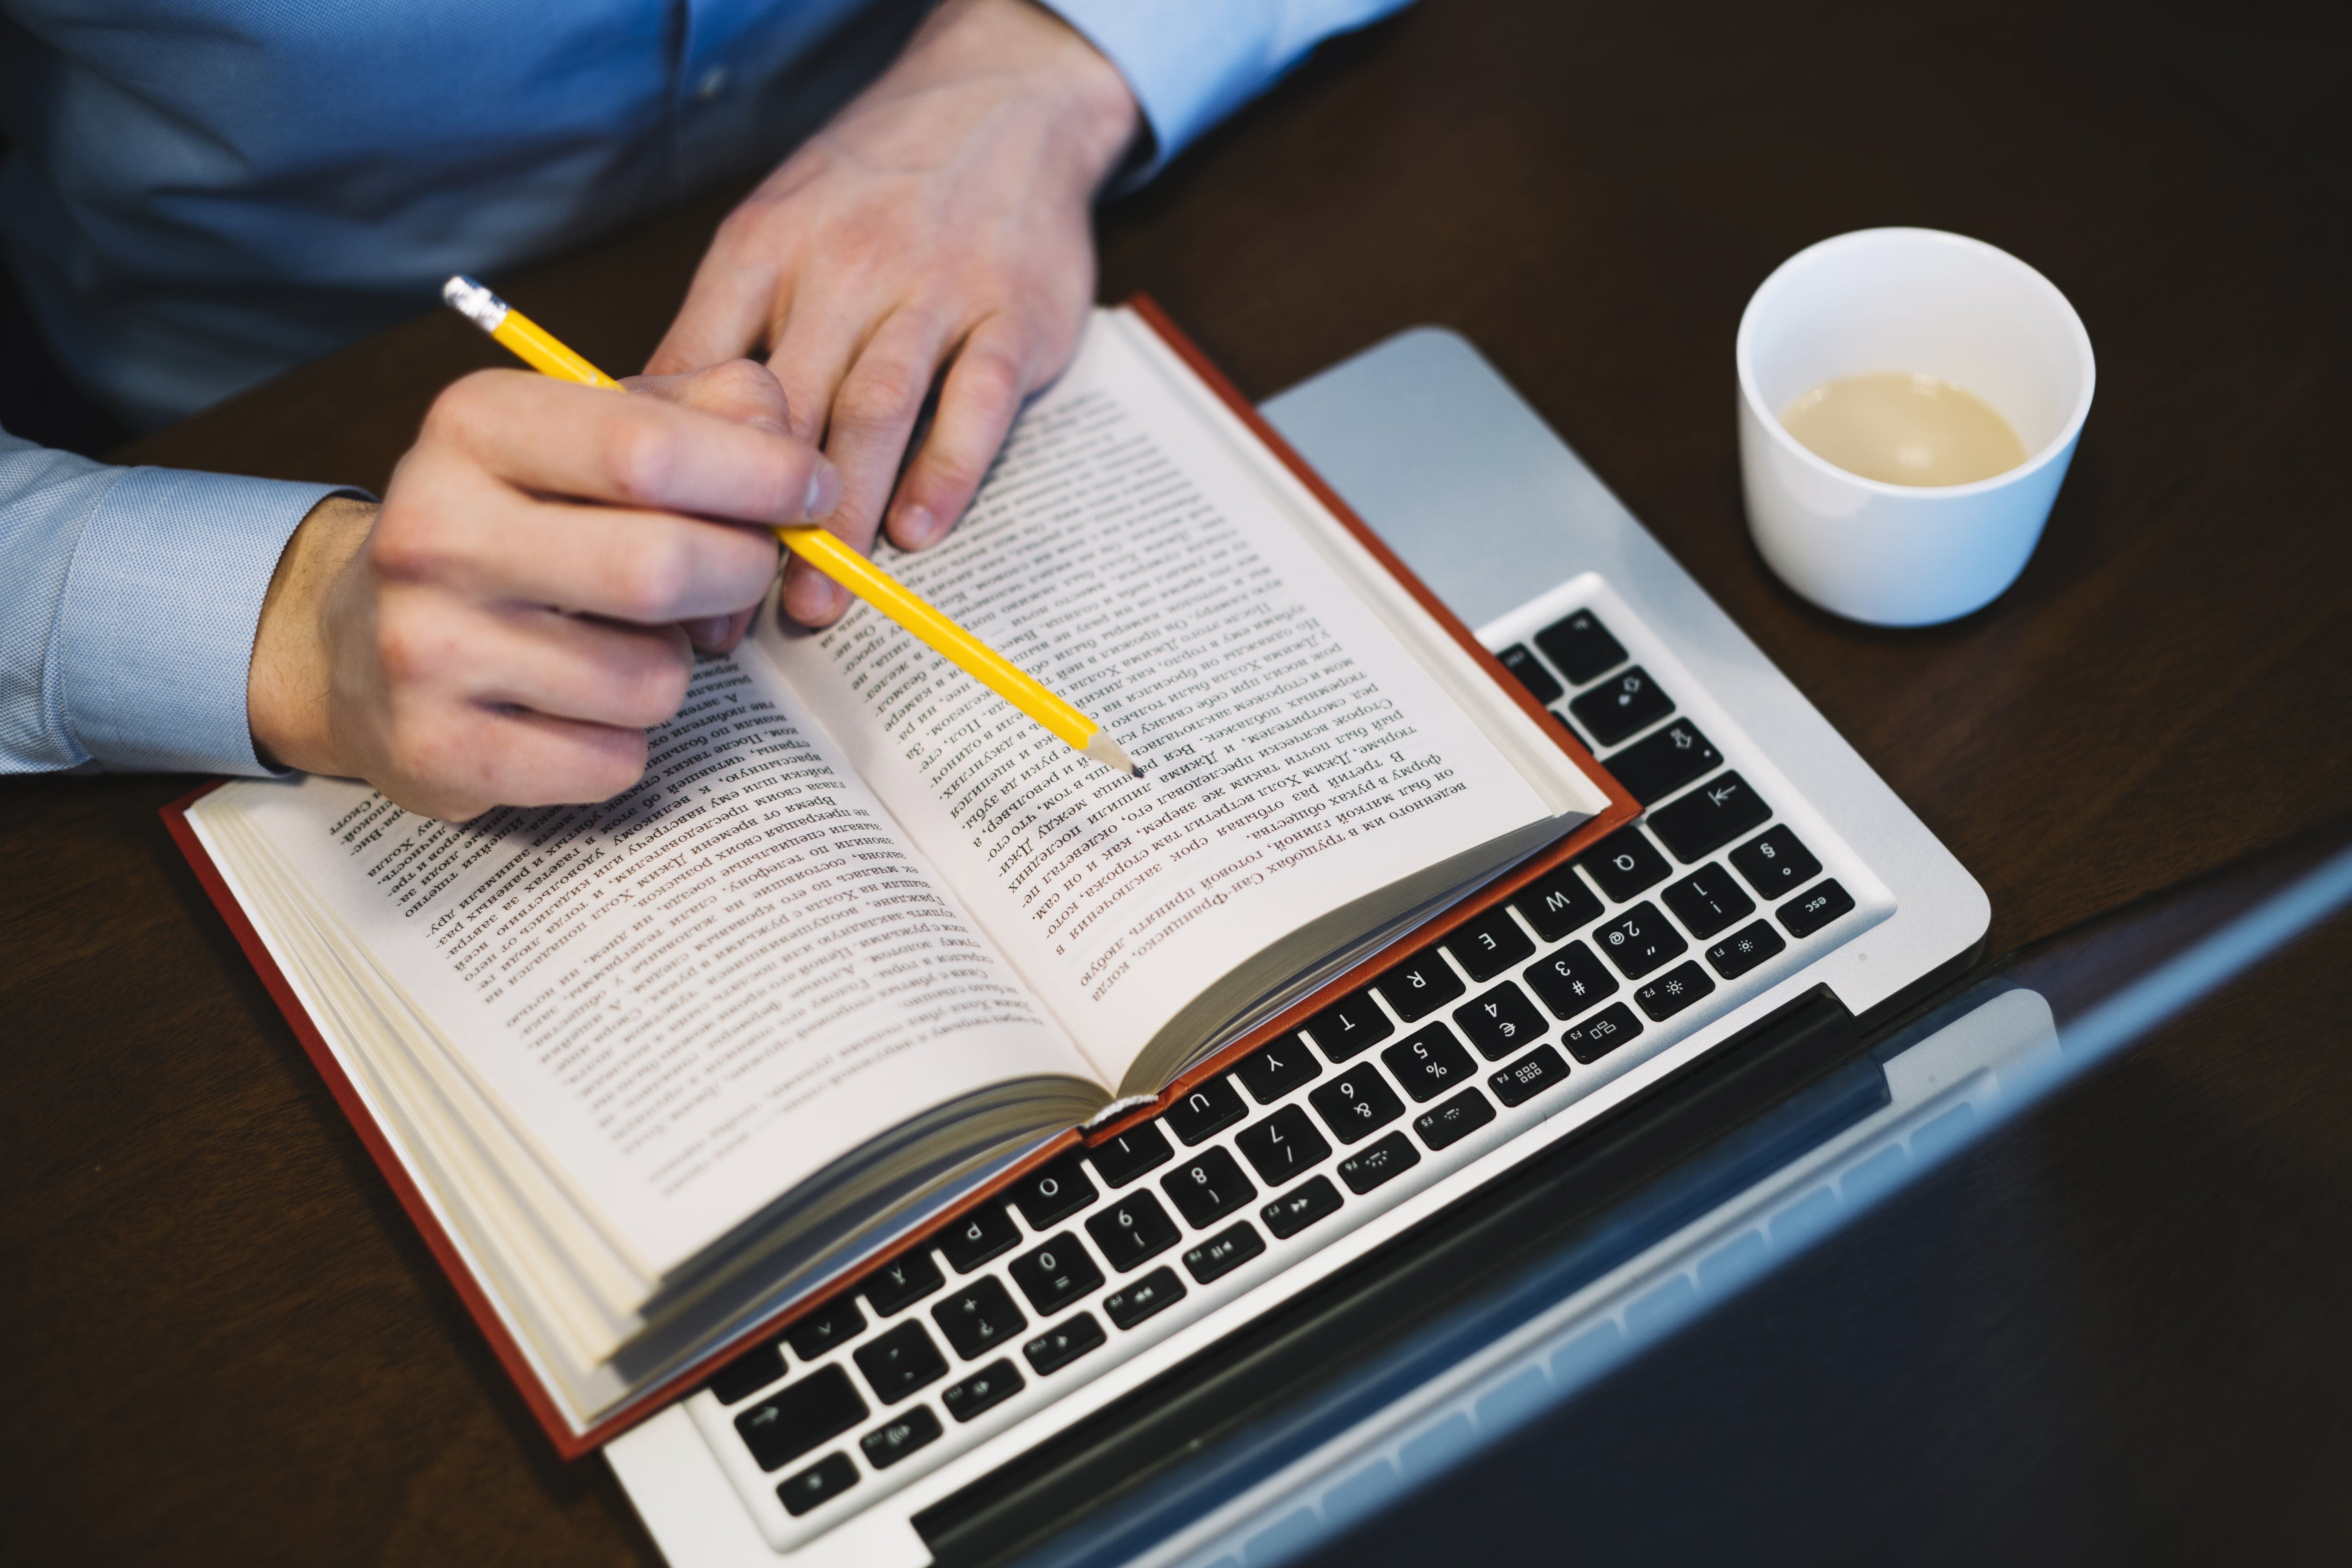 A focused man writing on a book with a pencil while enjoying a cup of coffee